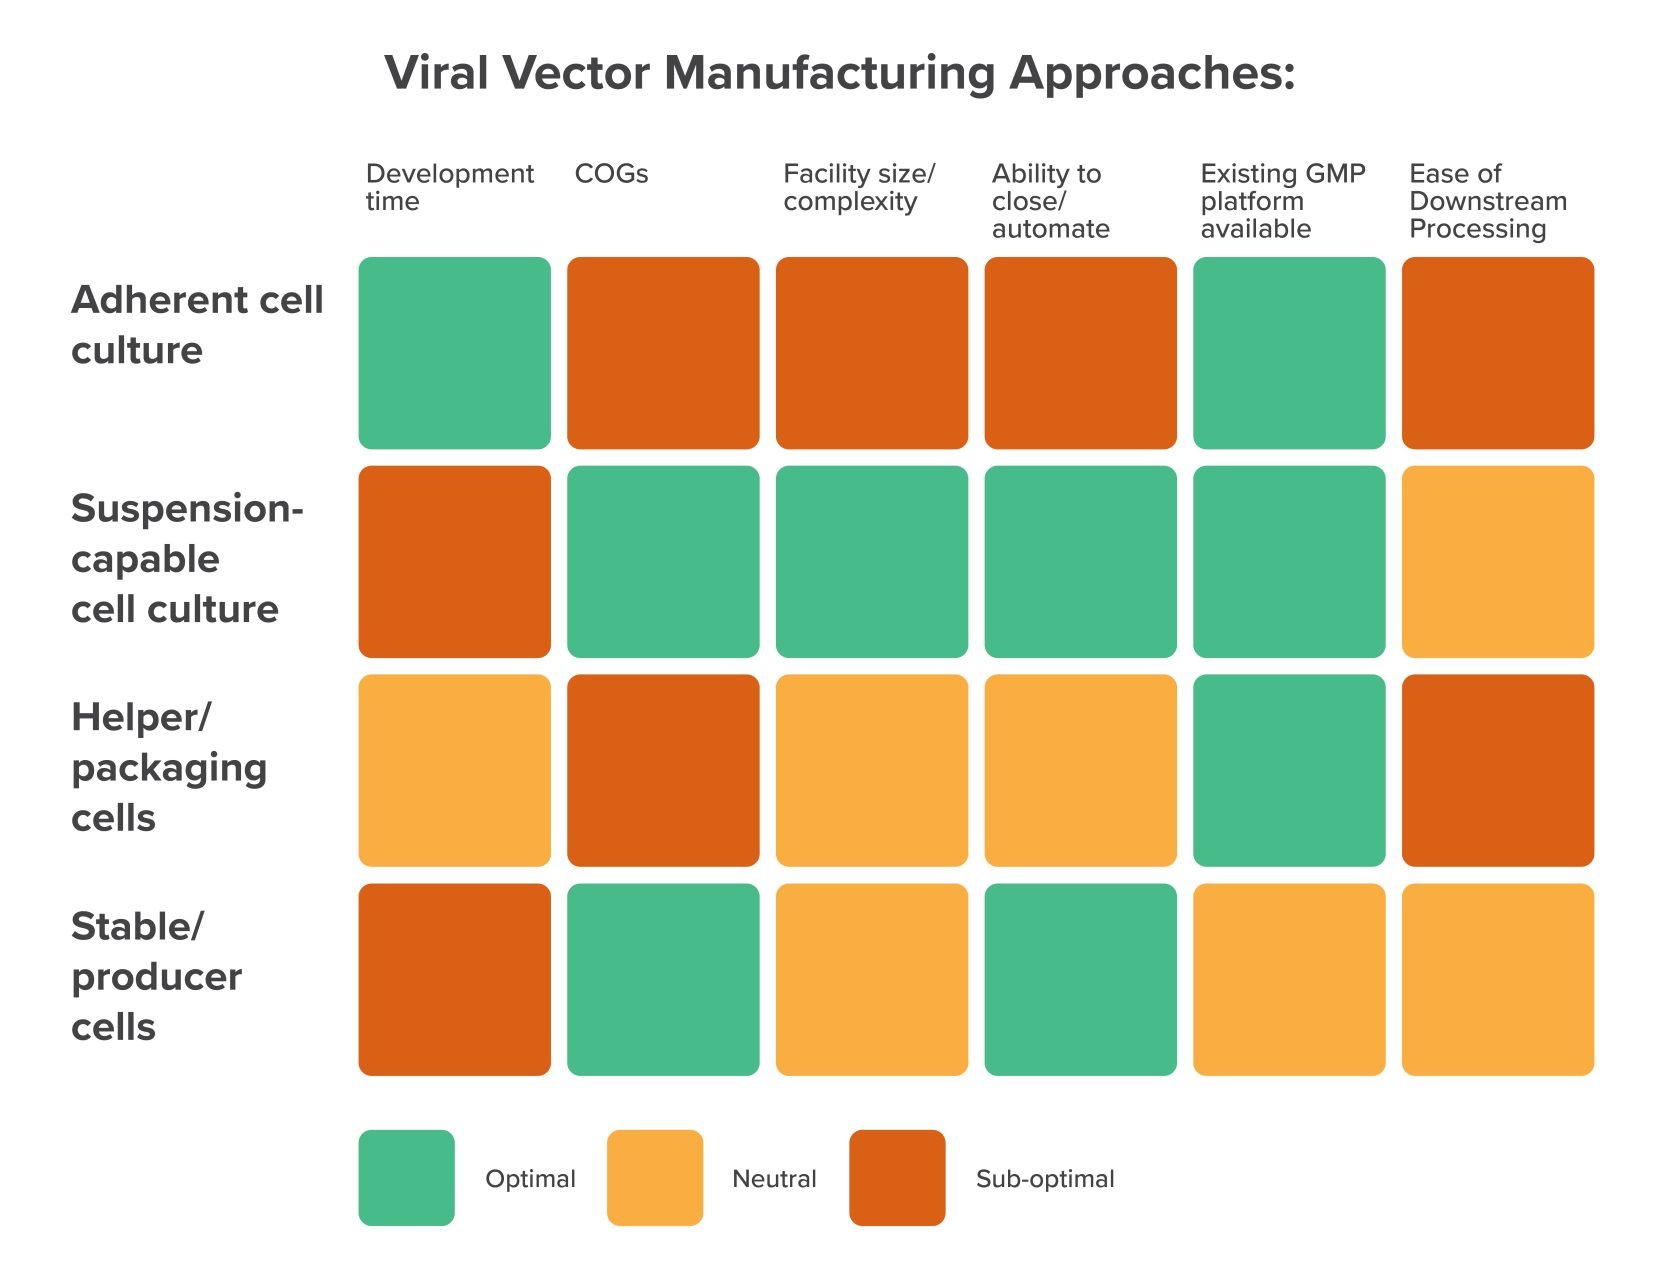 Viral vector manufacturing approaches